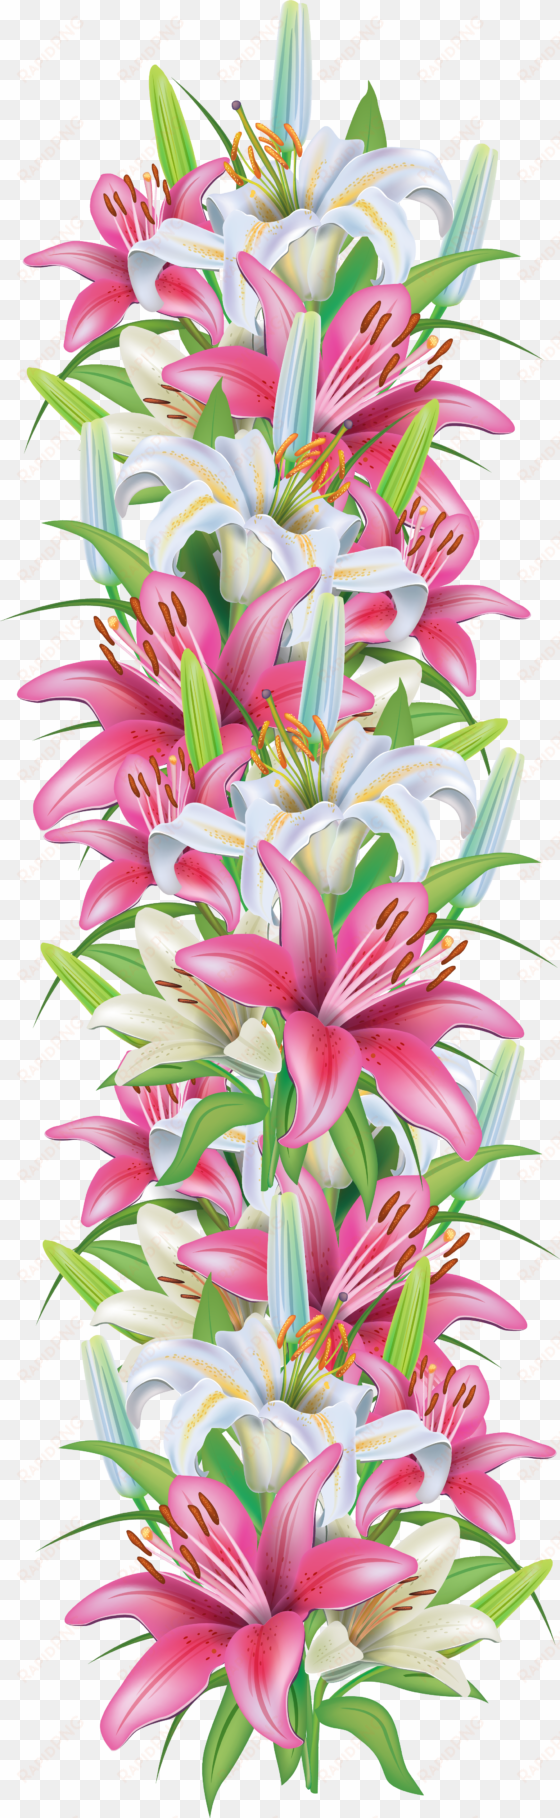 Pink And White Lilies Decoration Border Png Clipart - Lily Flower Border Png transparent png image